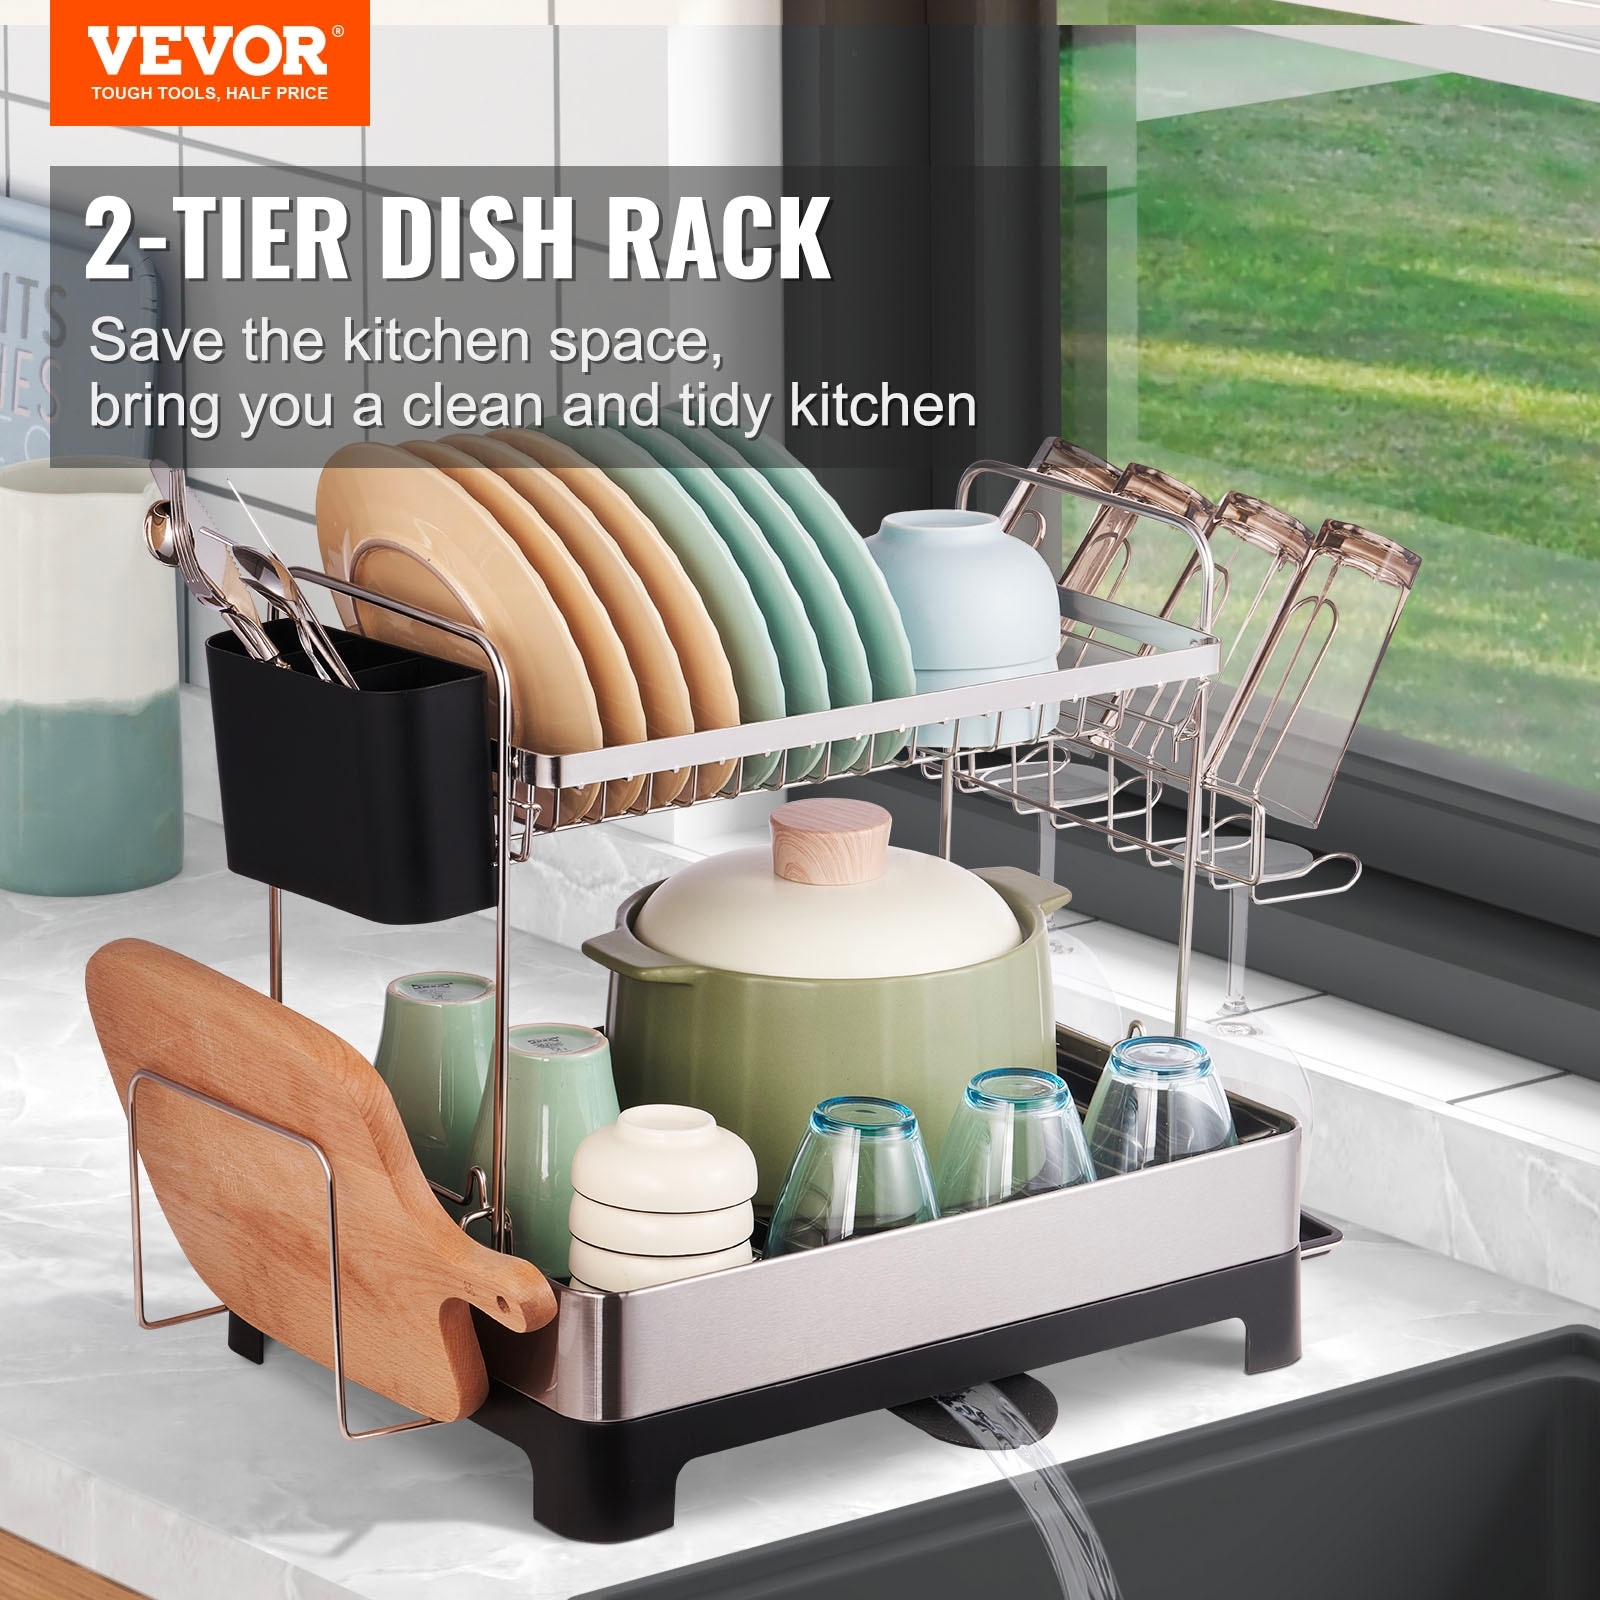 https://ak1.ostkcdn.com/images/products/is/images/direct/b838834e38a4b4829b6e3cd14ab5d689c3d1bbb8/VEVOR-2-Tier-Large-Dish-Drying-Rack-Rustproof-Stainless-Steel-Over-The-Sink-with-Drainboard-Cup-%26-Utensil-Holder.jpg